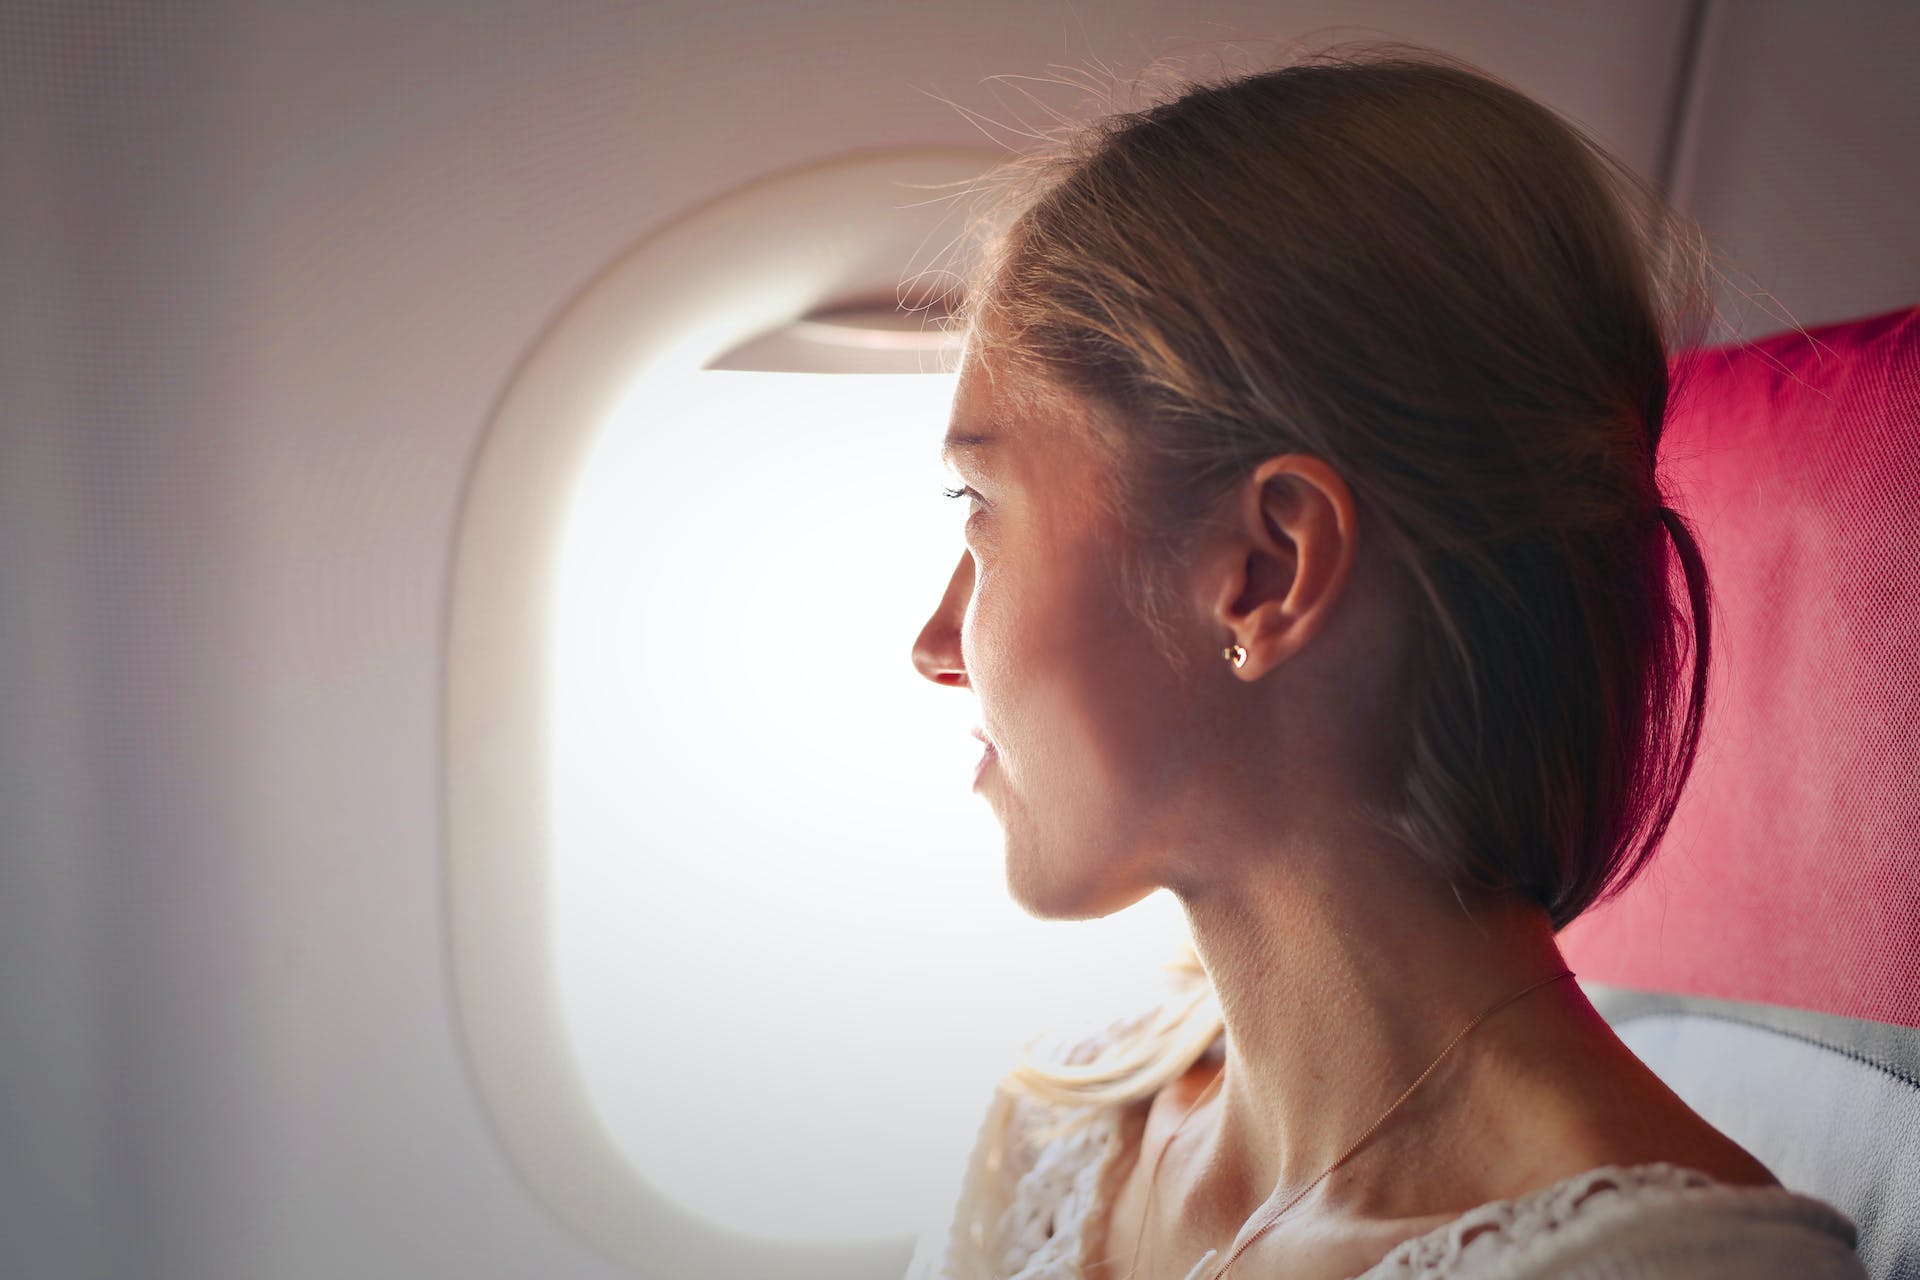 A woman looking outside an airplane window | Source: Pexels